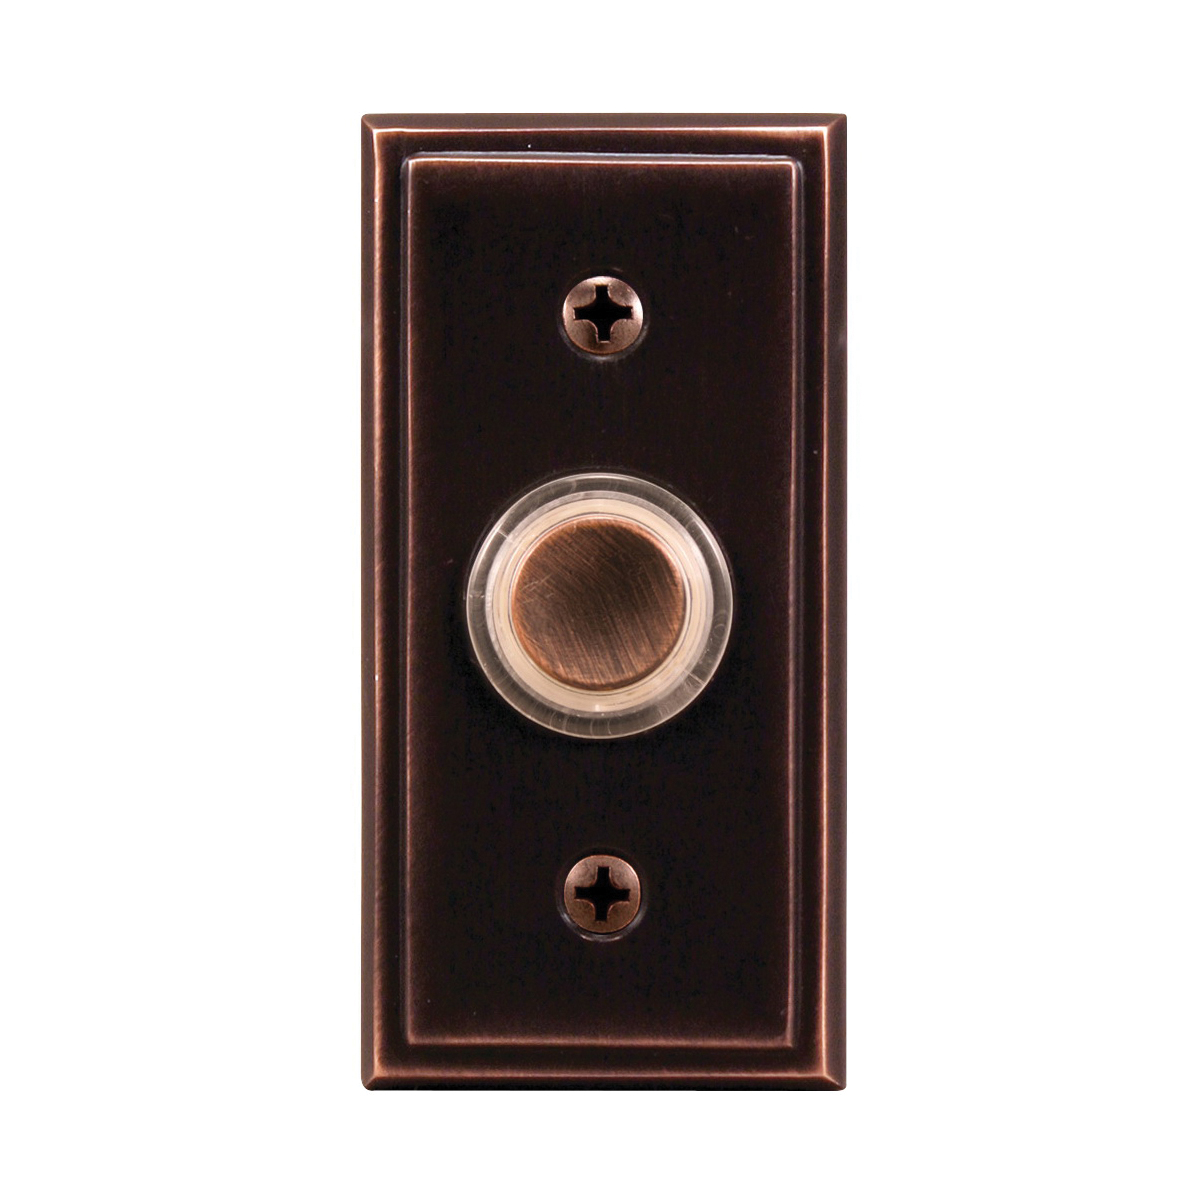 Heath Zenith SL-716-00 Pushbutton, Wired, Metal, Oil-Rubbed Bronze, Lighted - 1